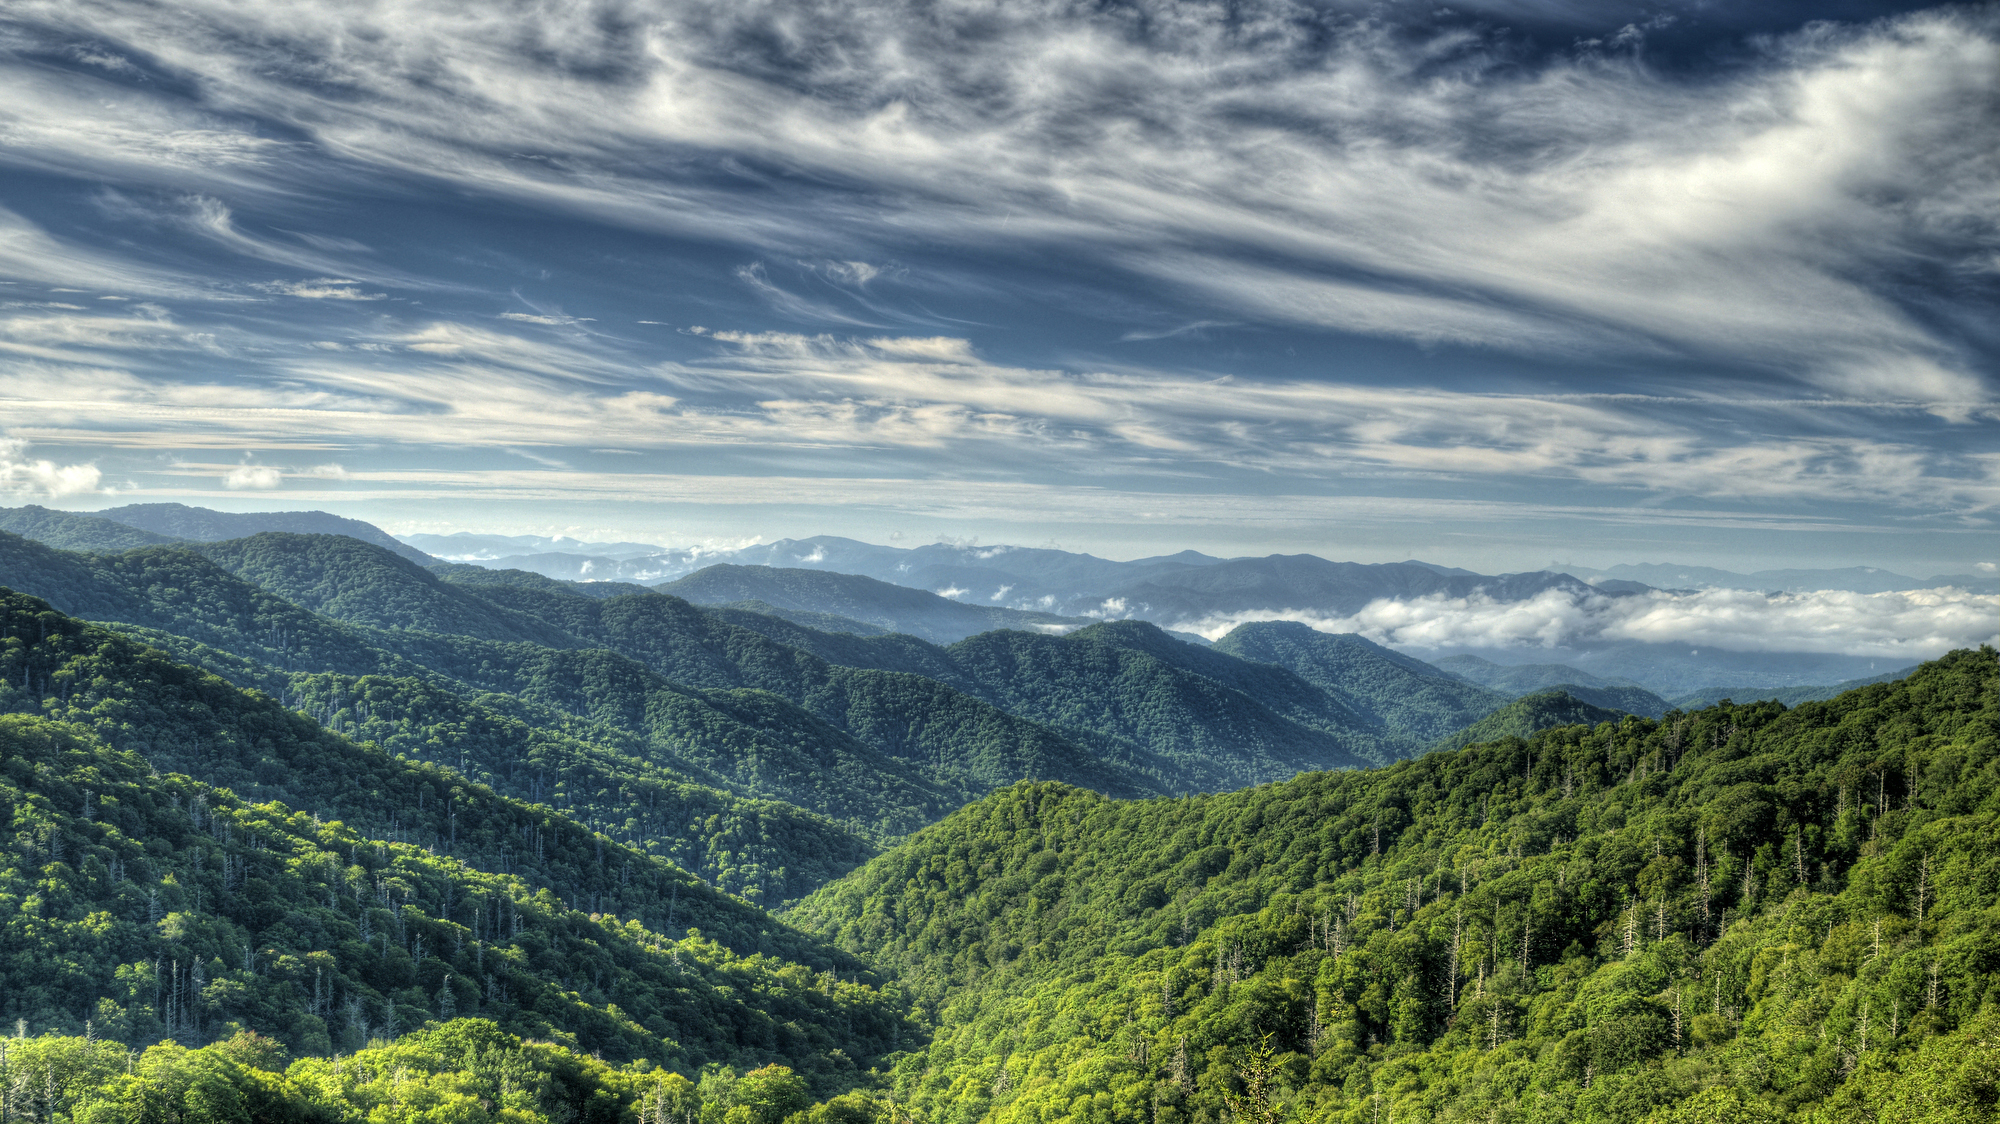 Every hiker should experience the Great Smoky Mountains where old-growth fo...